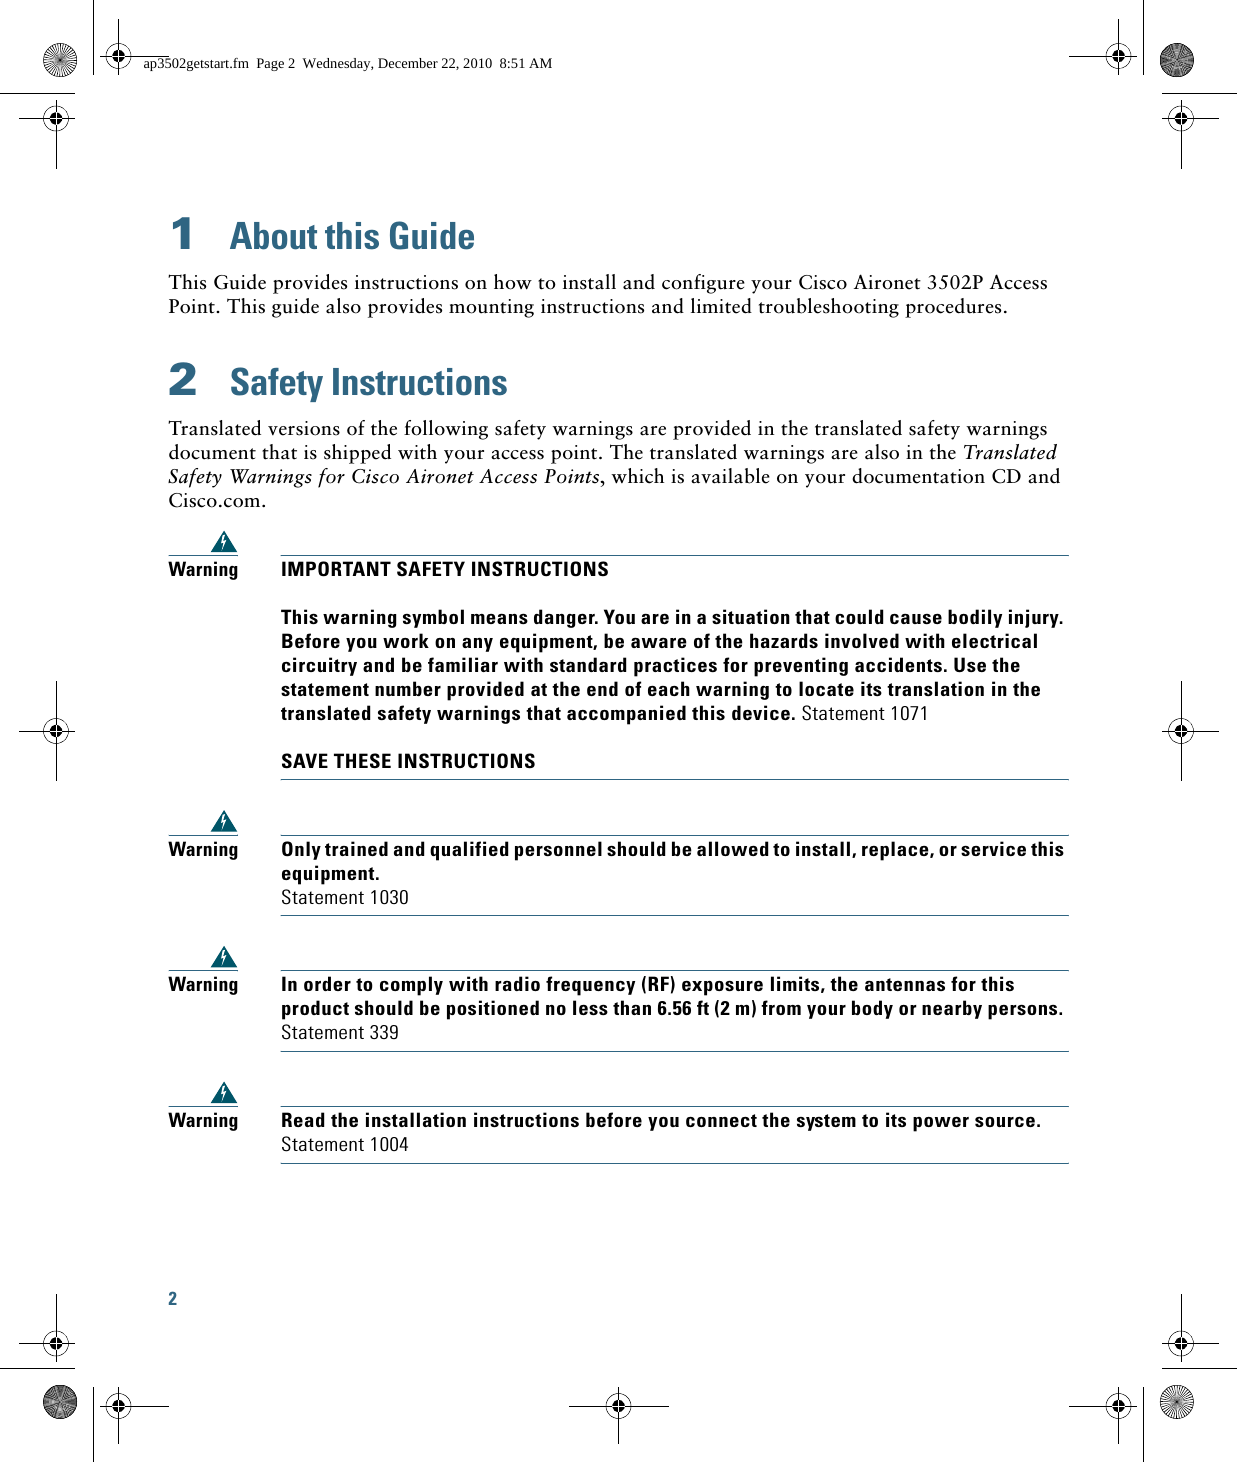 2 1  About this GuideThis Guide provides instructions on how to install and configure your Cisco Aironet 3502P Access Point. This guide also provides mounting instructions and limited troubleshooting procedures.2  Safety InstructionsTranslated versions of the following safety warnings are provided in the translated safety warnings document that is shipped with your access point. The translated warnings are also in the Translated Safety Warnings for Cisco Aironet Access Points, which is available on your documentation CD and Cisco.com.WarningIMPORTANT SAFETY INSTRUCTIONS  This warning symbol means danger. You are in a situation that could cause bodily injury. Before you work on any equipment, be aware of the hazards involved with electrical circuitry and be familiar with standard practices for preventing accidents. Use the statement number provided at the end of each warning to locate its translation in the translated safety warnings that accompanied this device. Statement 1071  SAVE THESE INSTRUCTIONSWarningOnly trained and qualified personnel should be allowed to install, replace, or service this equipment. Statement 1030WarningIn order to comply with radio frequency (RF) exposure limits, the antennas for this product should be positioned no less than 6.56 ft (2 m) from your body or nearby persons. Statement 339WarningRead the installation instructions before you connect the system to its power source. Statement 1004ap3502getstart.fm  Page 2  Wednesday, December 22, 2010  8:51 AM